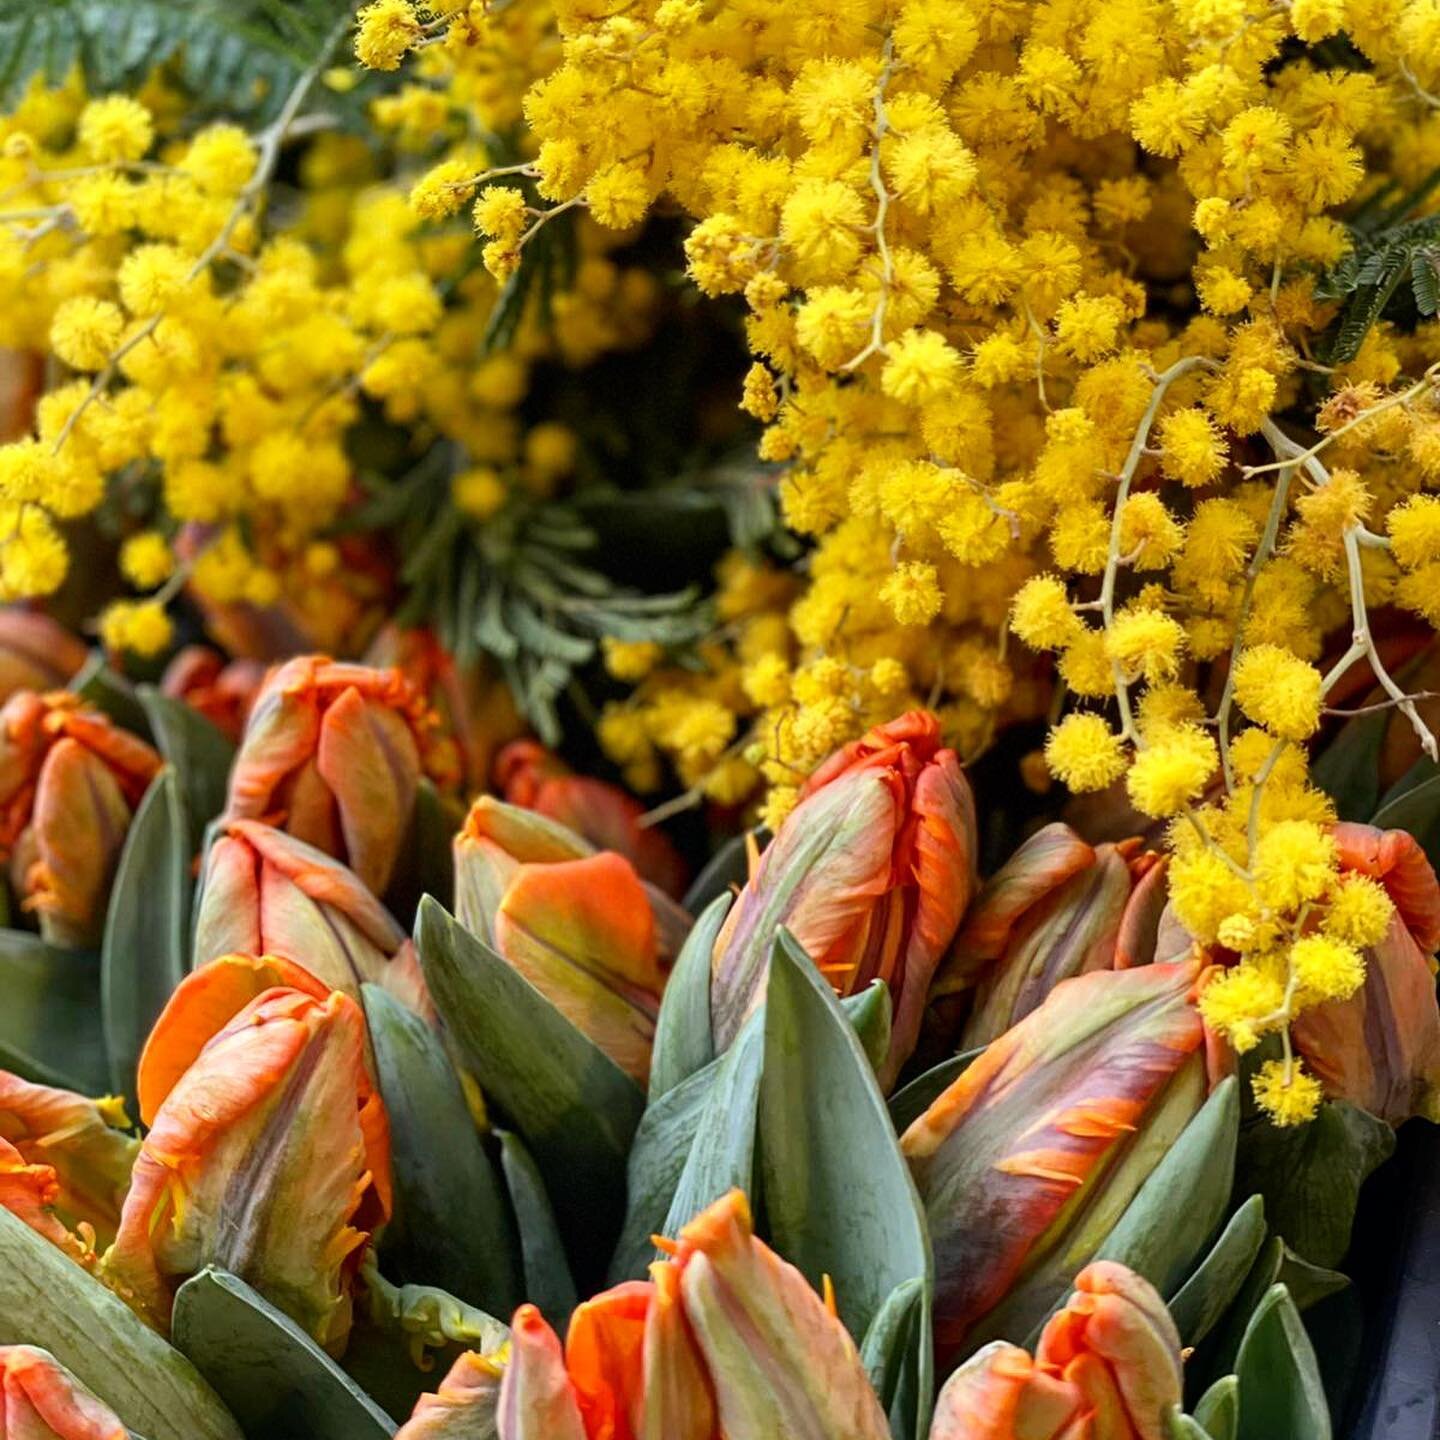 Super excited to stock small bunches of mimosa &amp; parrot tulips in @lydiaenniskillen tomorrow and Saturday! 💛 Pop in and get a bunch with some yummy cupcakes &amp; buns! 

#mothersday #mothersdaygift #flowerbunch #mimosa #tulips #cakesandflowers 